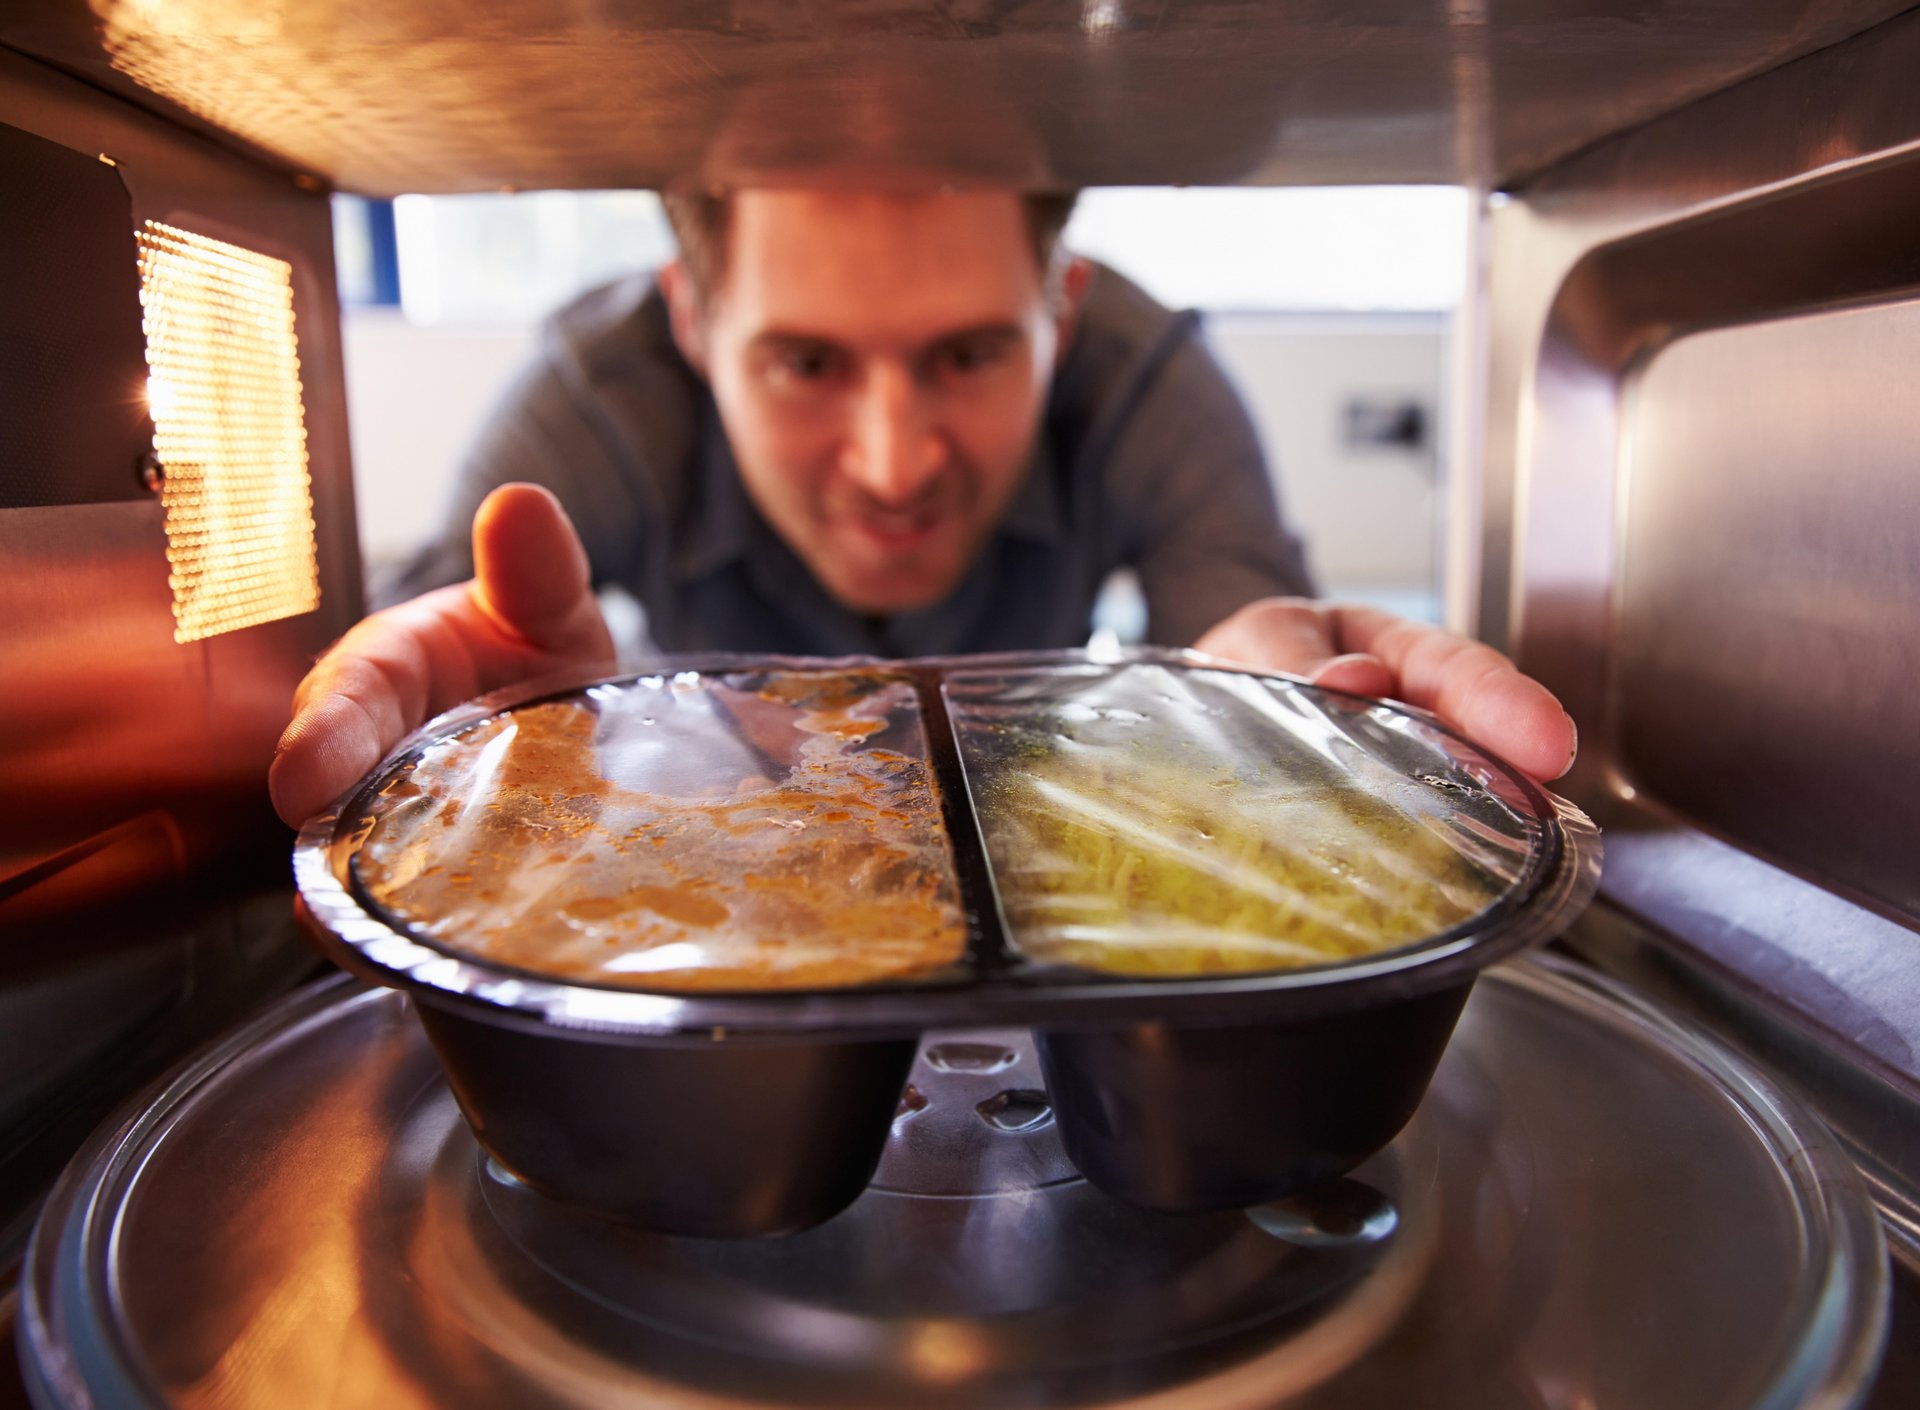 News Picture: Frozen Stuffed Chicken Products & Microwave Ovens: A Recipe for Salmonella